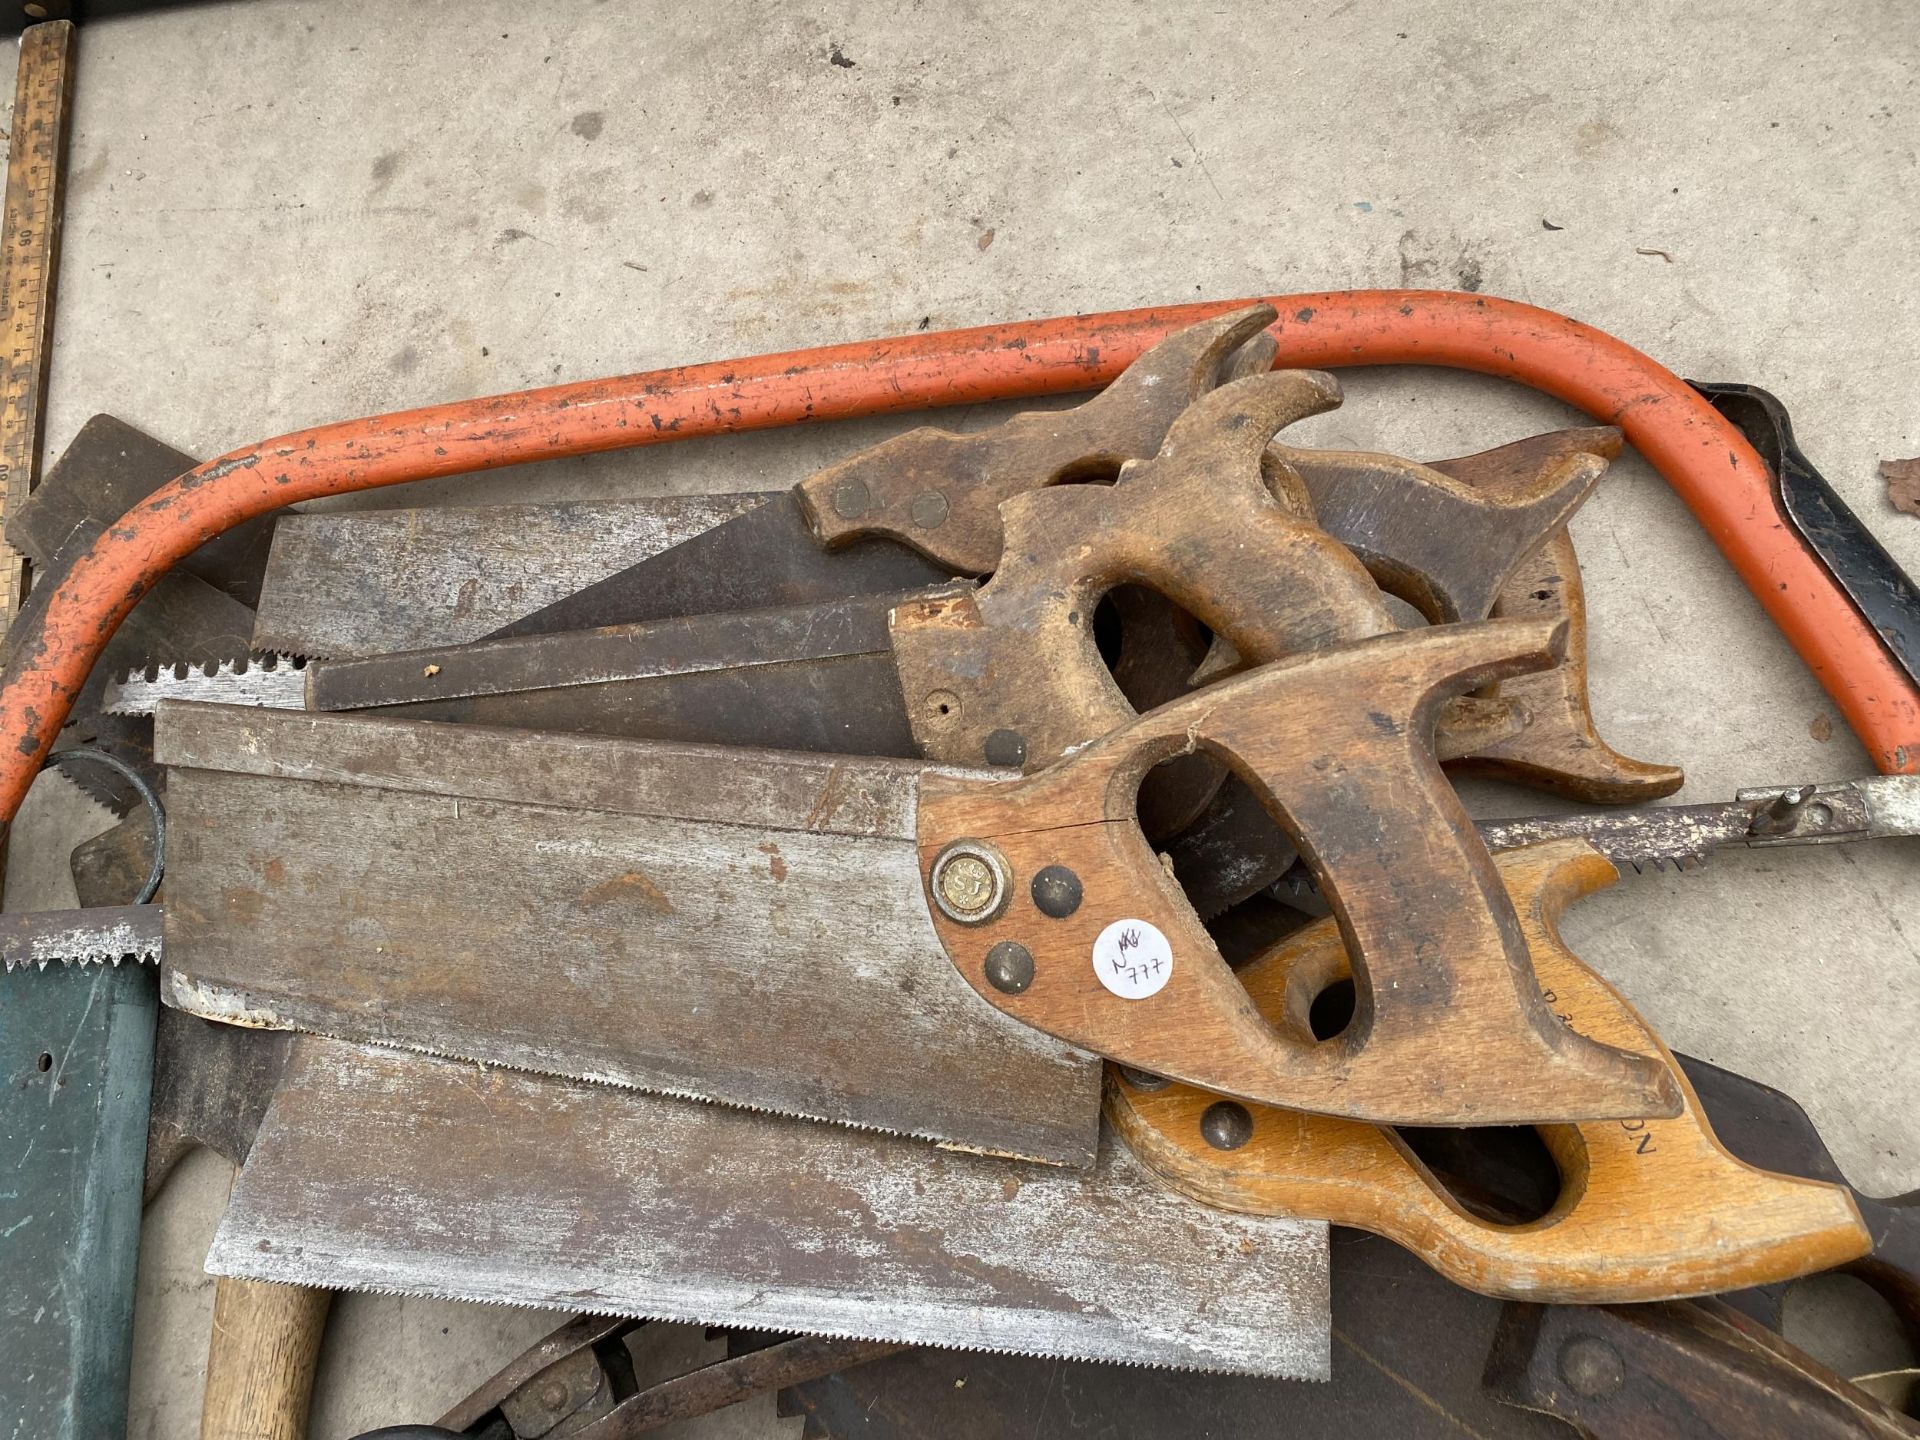 AN ASSORTMENT OF VINTAGE TOOLS TO INCLUDE SAWS, AN AXE AND A 12MM X 1000MM SDS DRILL BIT ETC - Image 2 of 3